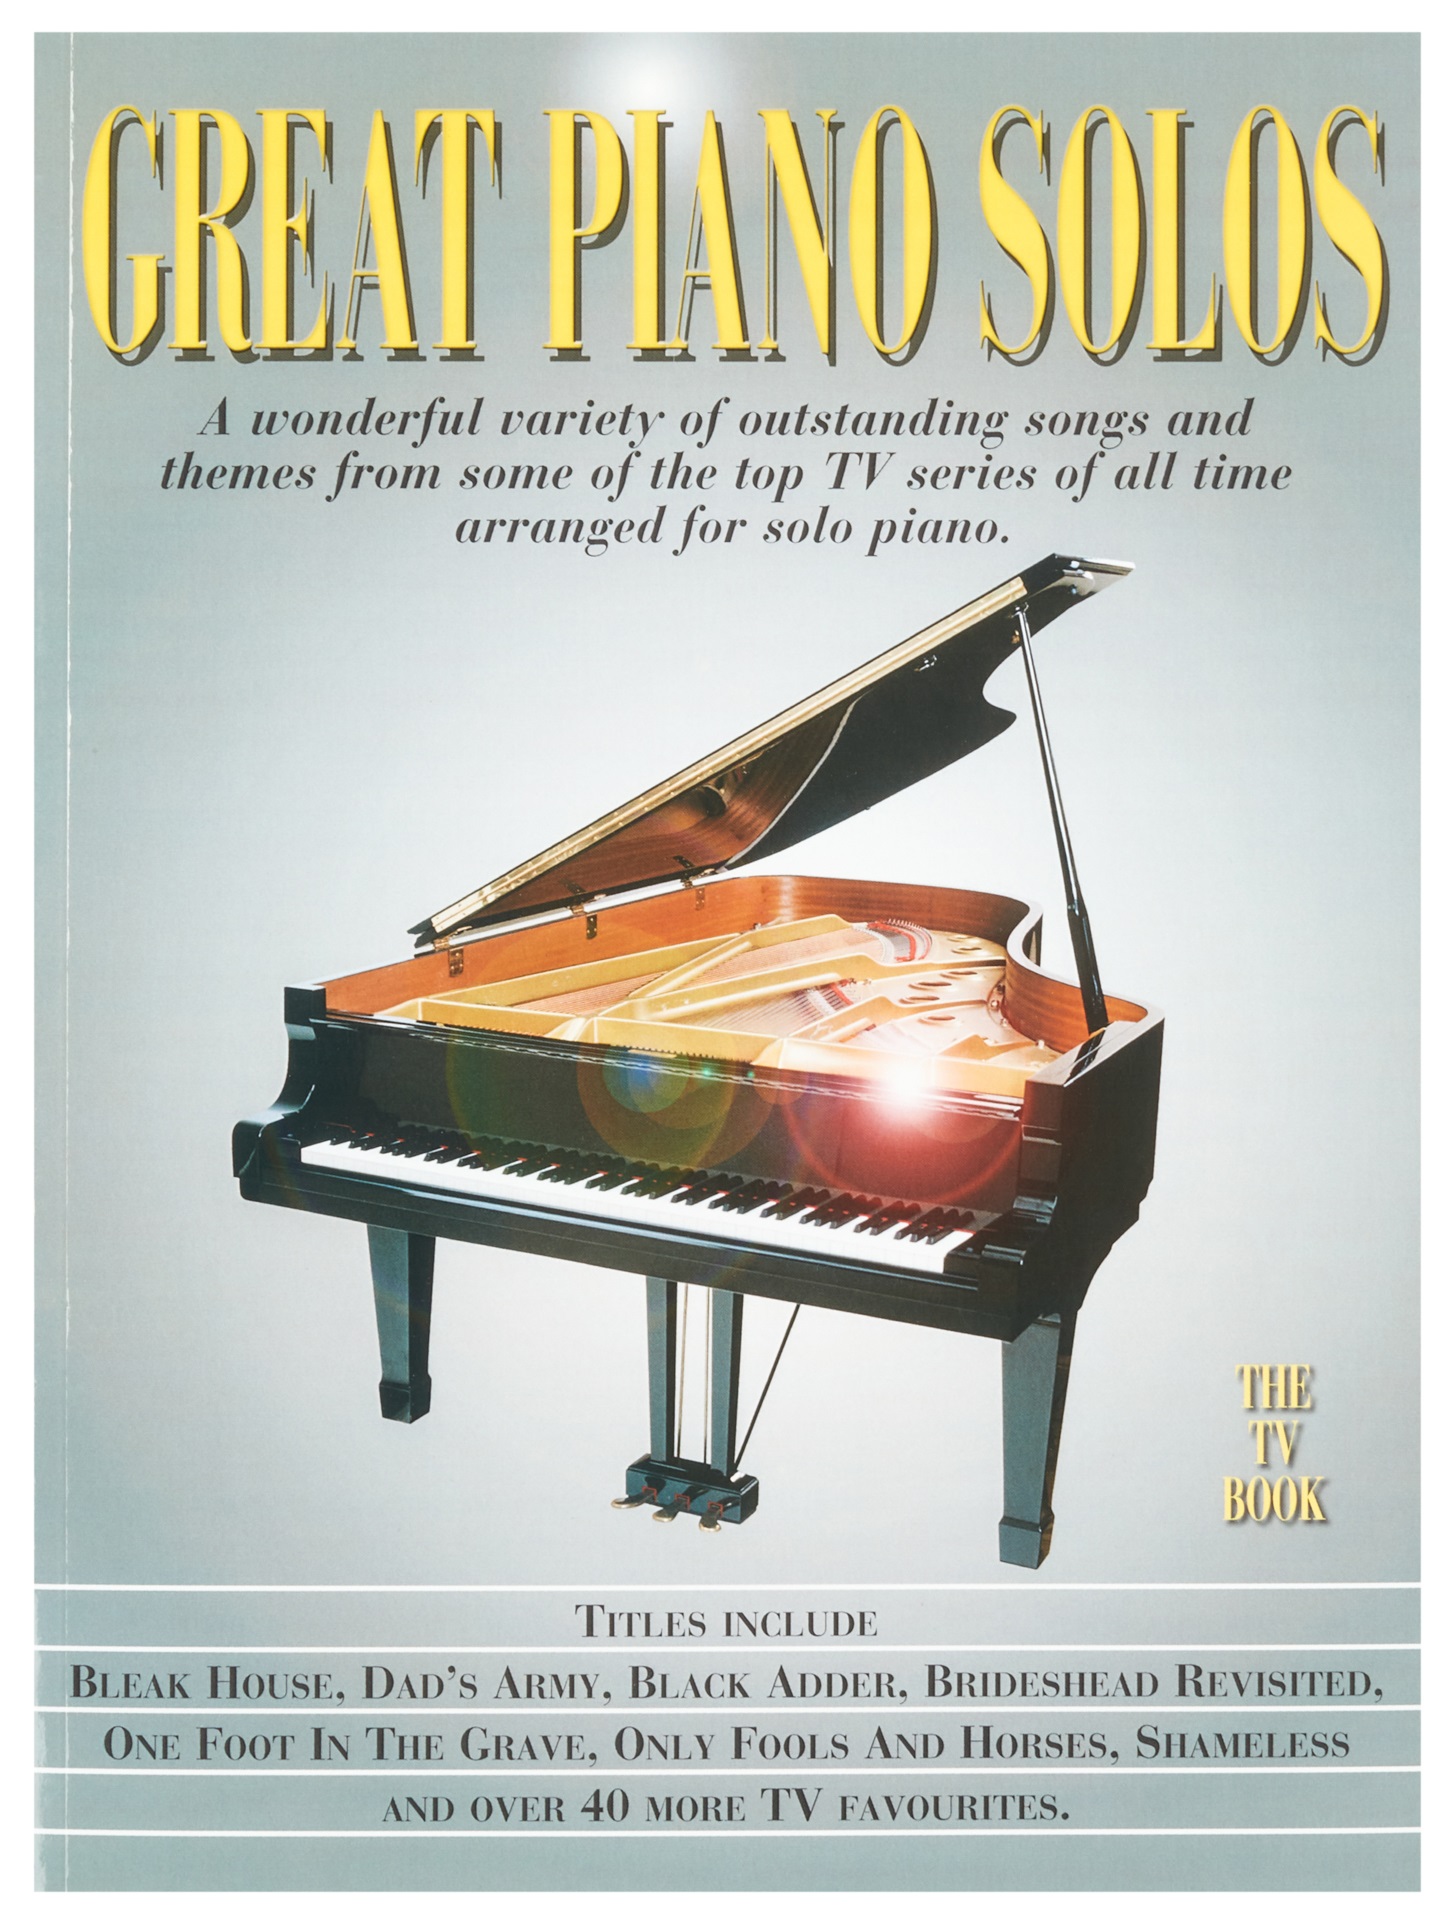 Fotografie MS Great Piano Solos - The TV Book